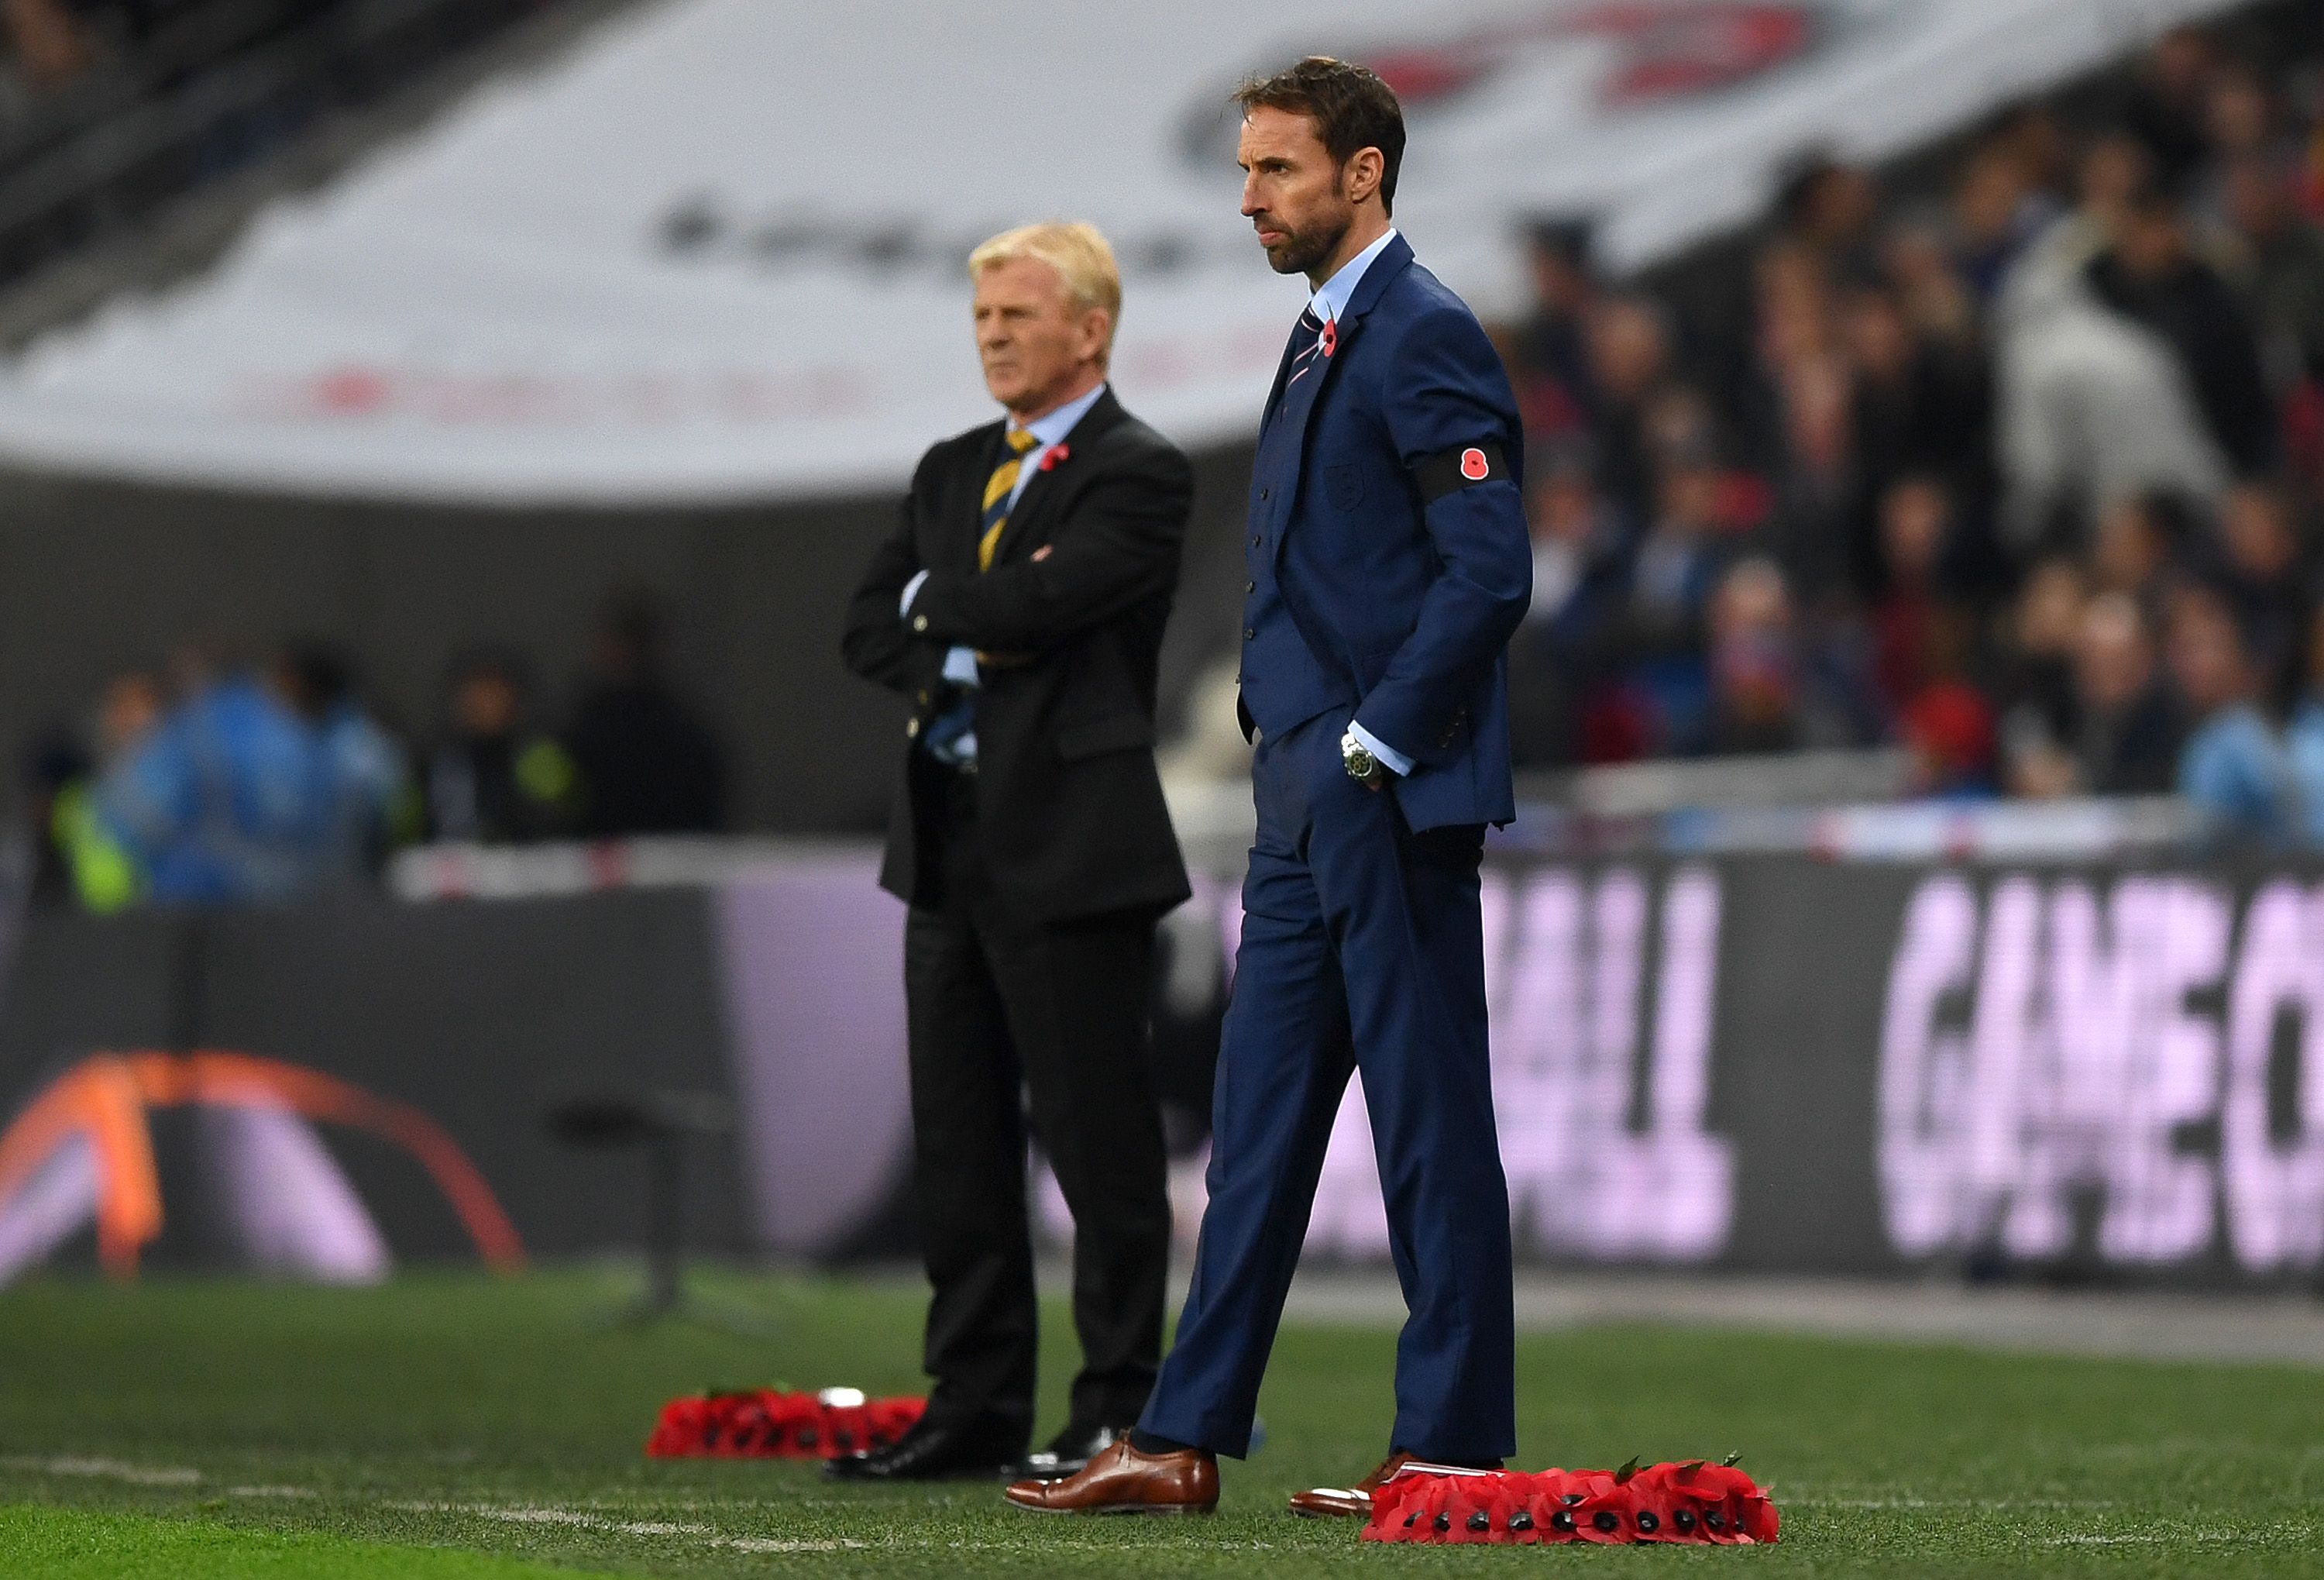 LONDON, ENGLAND - NOVEMBER 11: Gareth Southgate interim manager of England wears a Poppy black armband as he looks on alongside Gordon Strachan of Scotland during the FIFA 2018 World Cup qualifying match between England and Scotland at Wembley Stadium on November 11, 2016 in London, England. (Photo by Shaun Botterill/Getty Images)